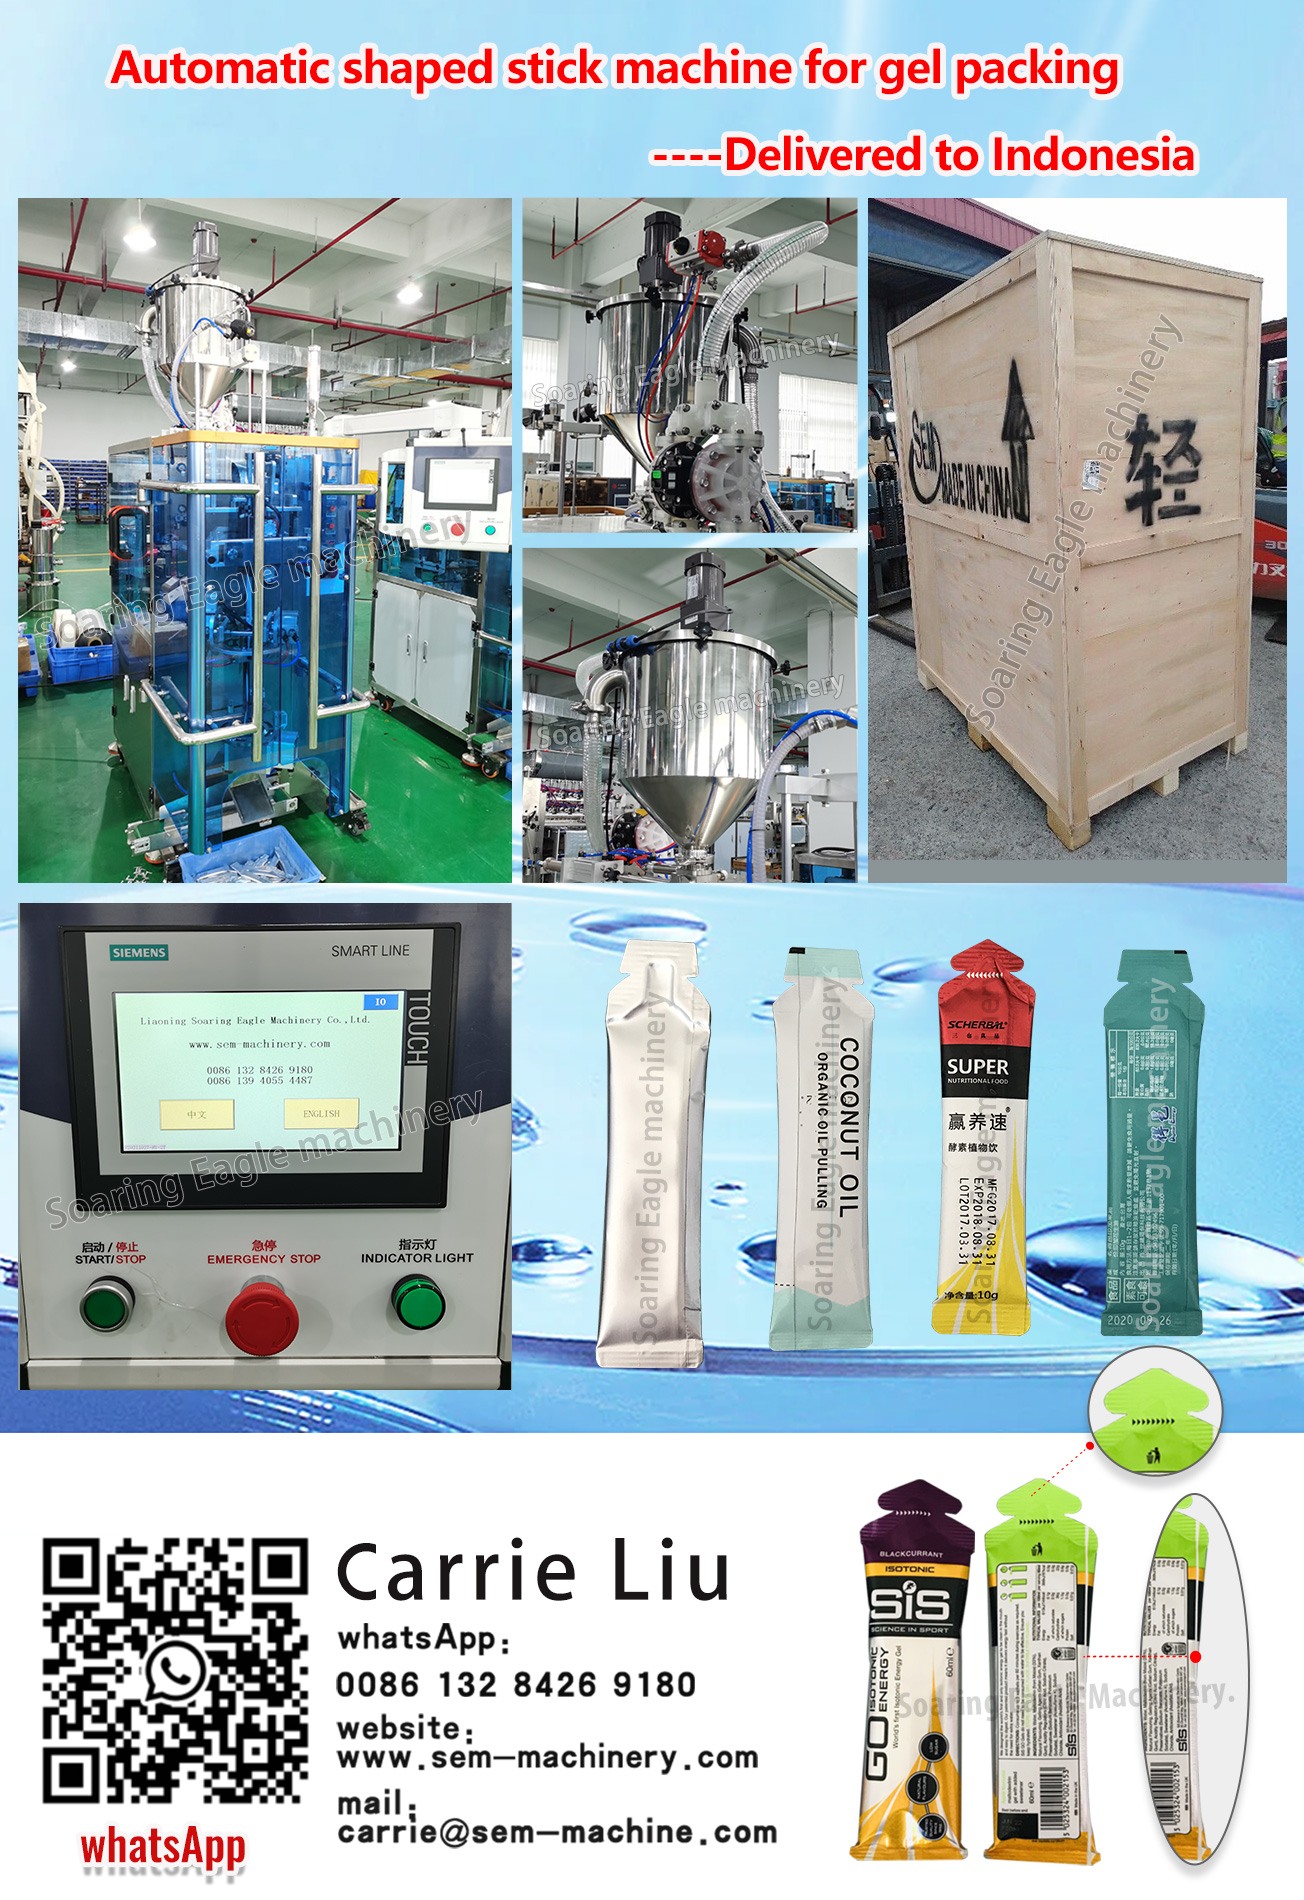 Automatic shape stick sachet packing machine for gel packing——Deliver to Indonesia